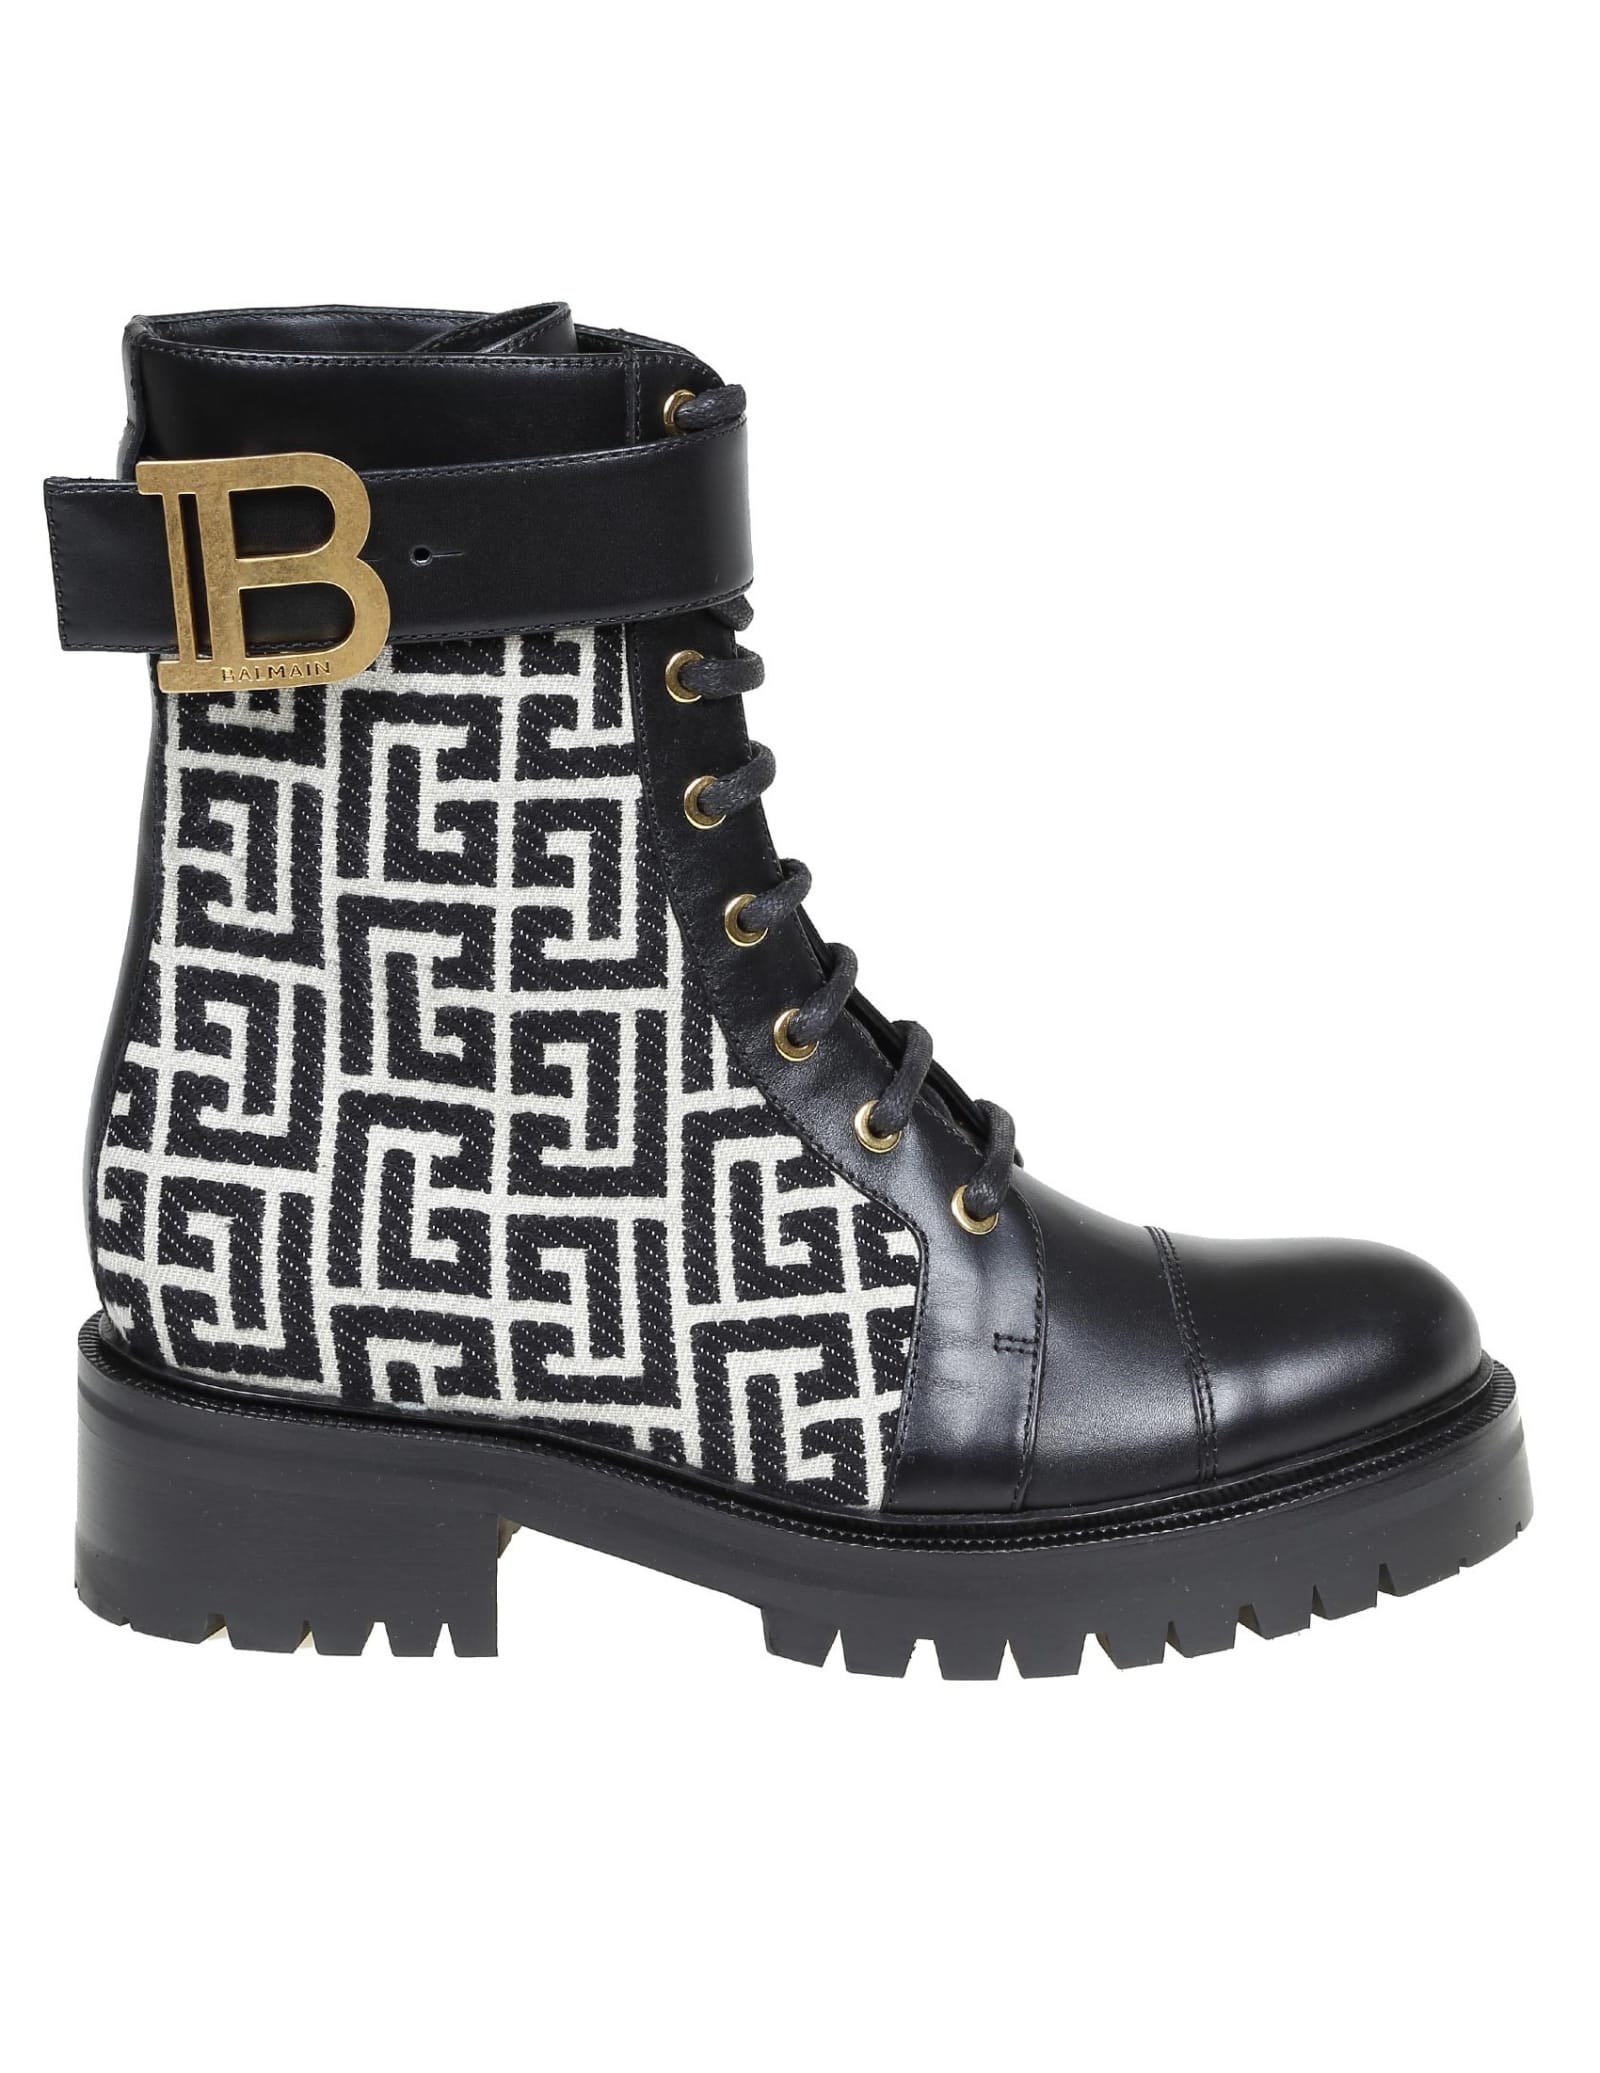 Buy Balmain Ranger Boot In Leather And Fabric With Monogram online, shop Balmain shoes with free shipping